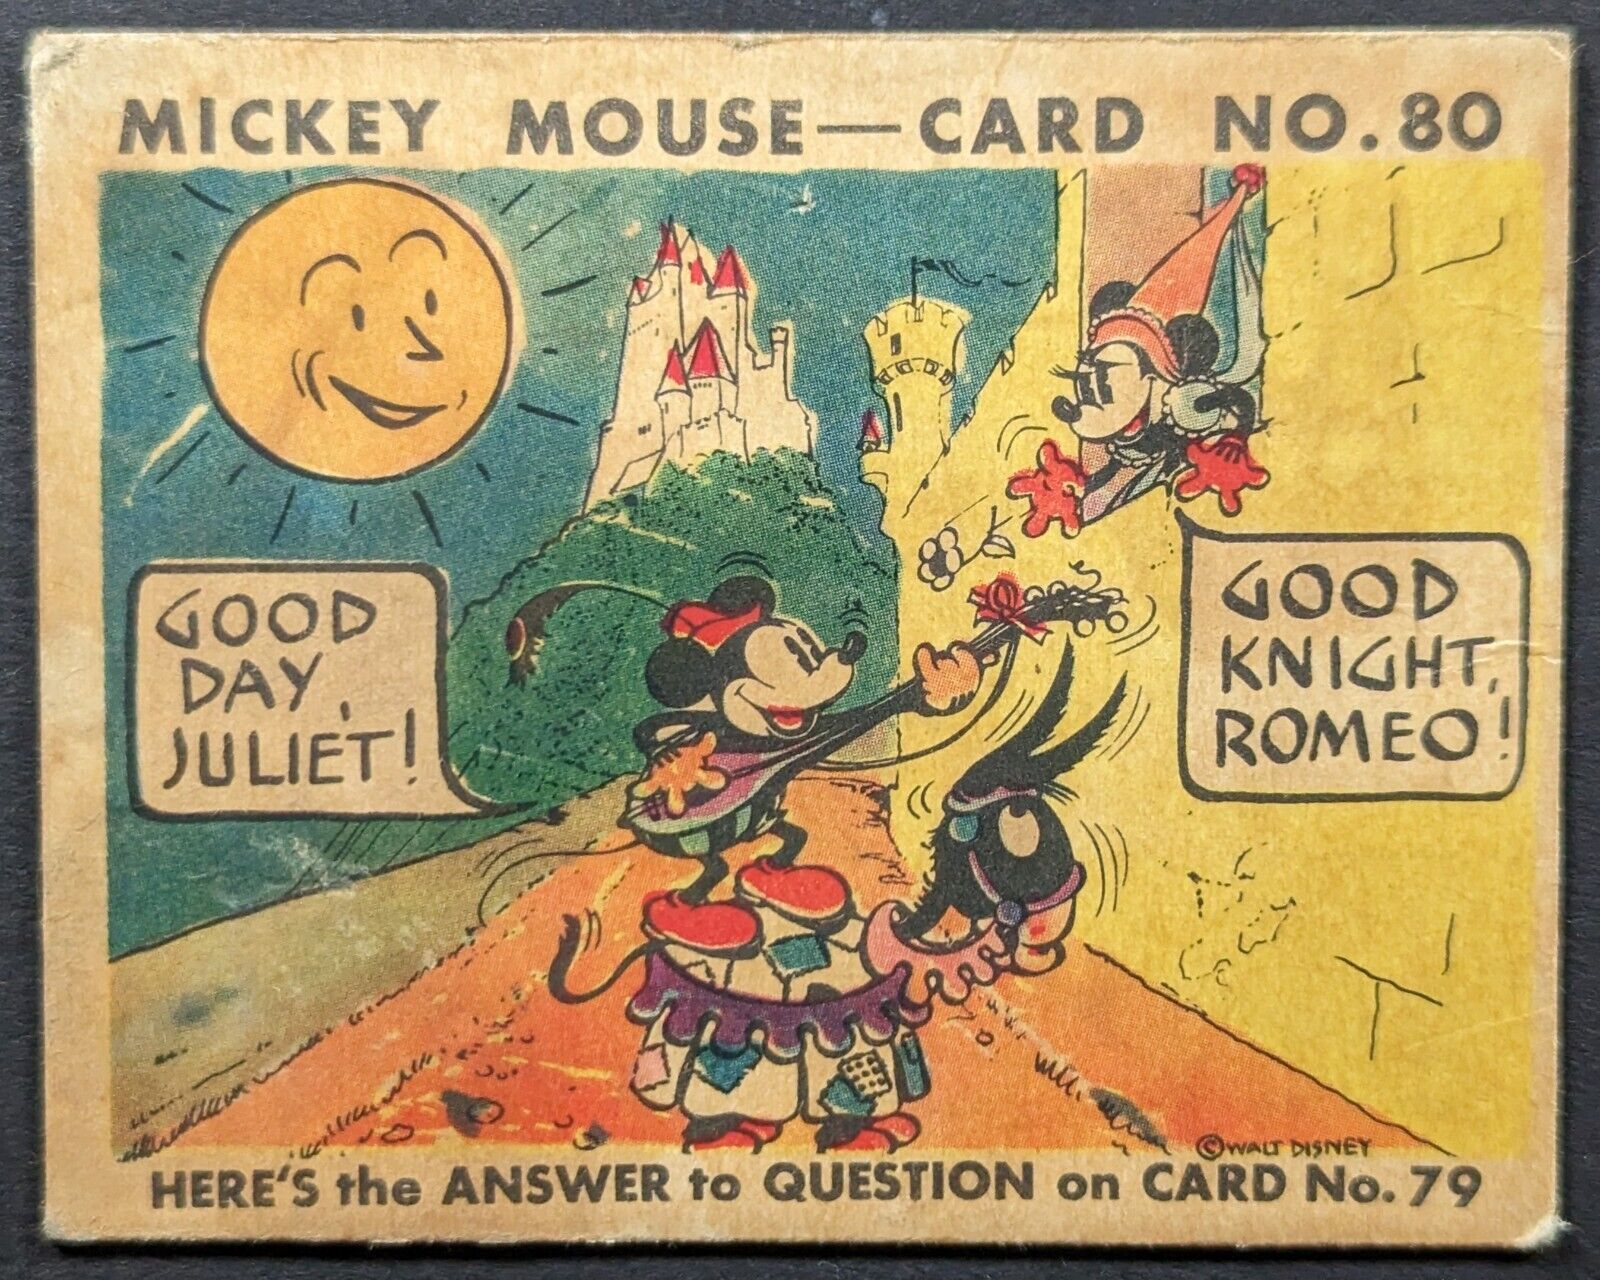 Mickey Mouse 1935 R89 Gum Card #80 (Minor Stains, Soft Corners)